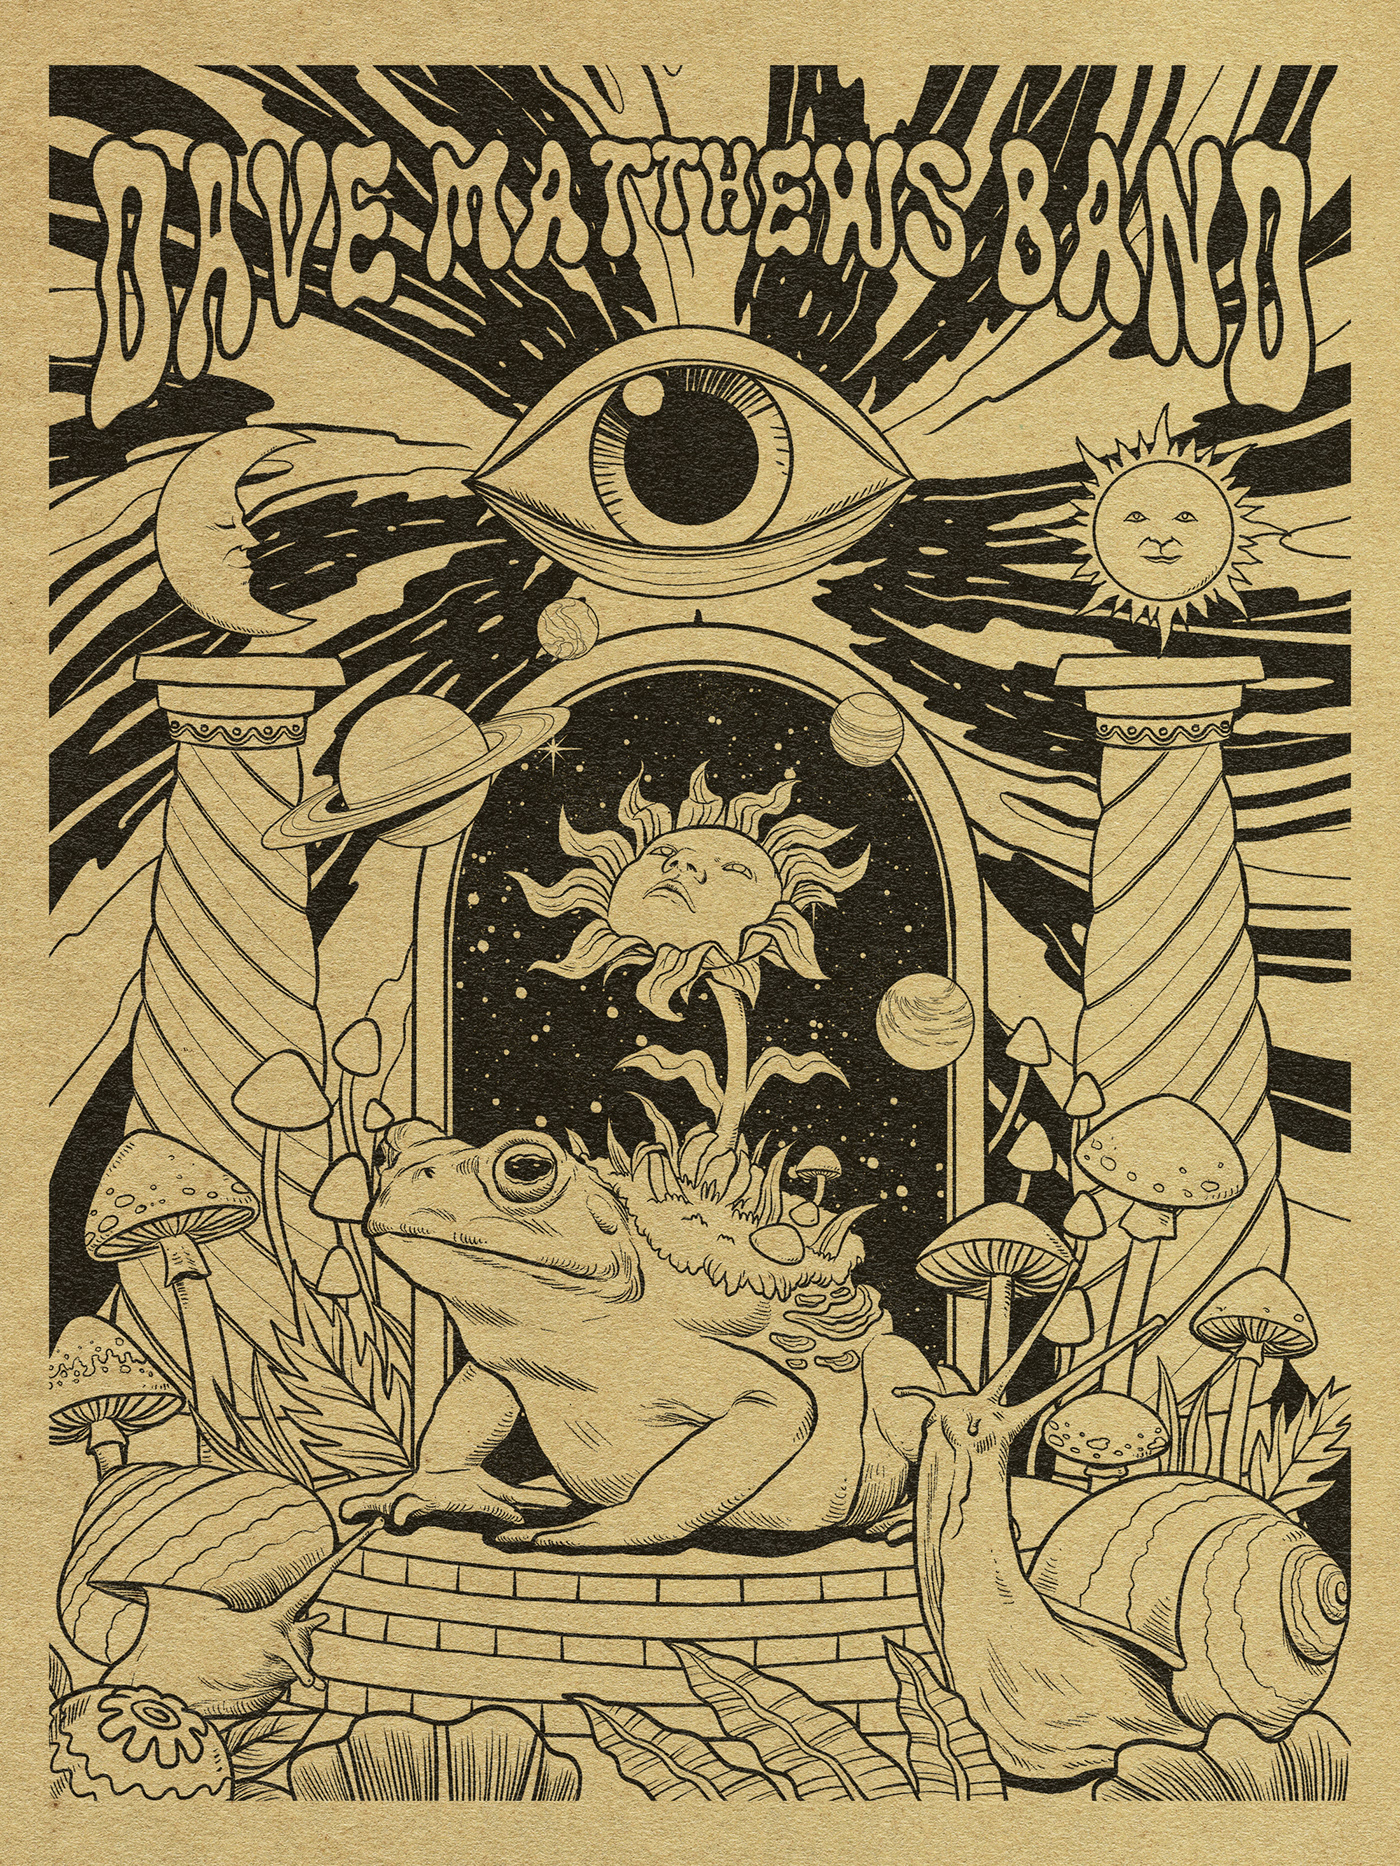 cosmic dave matthews band gig poster hollywood mushroom music Mystic portal poster psychedelic